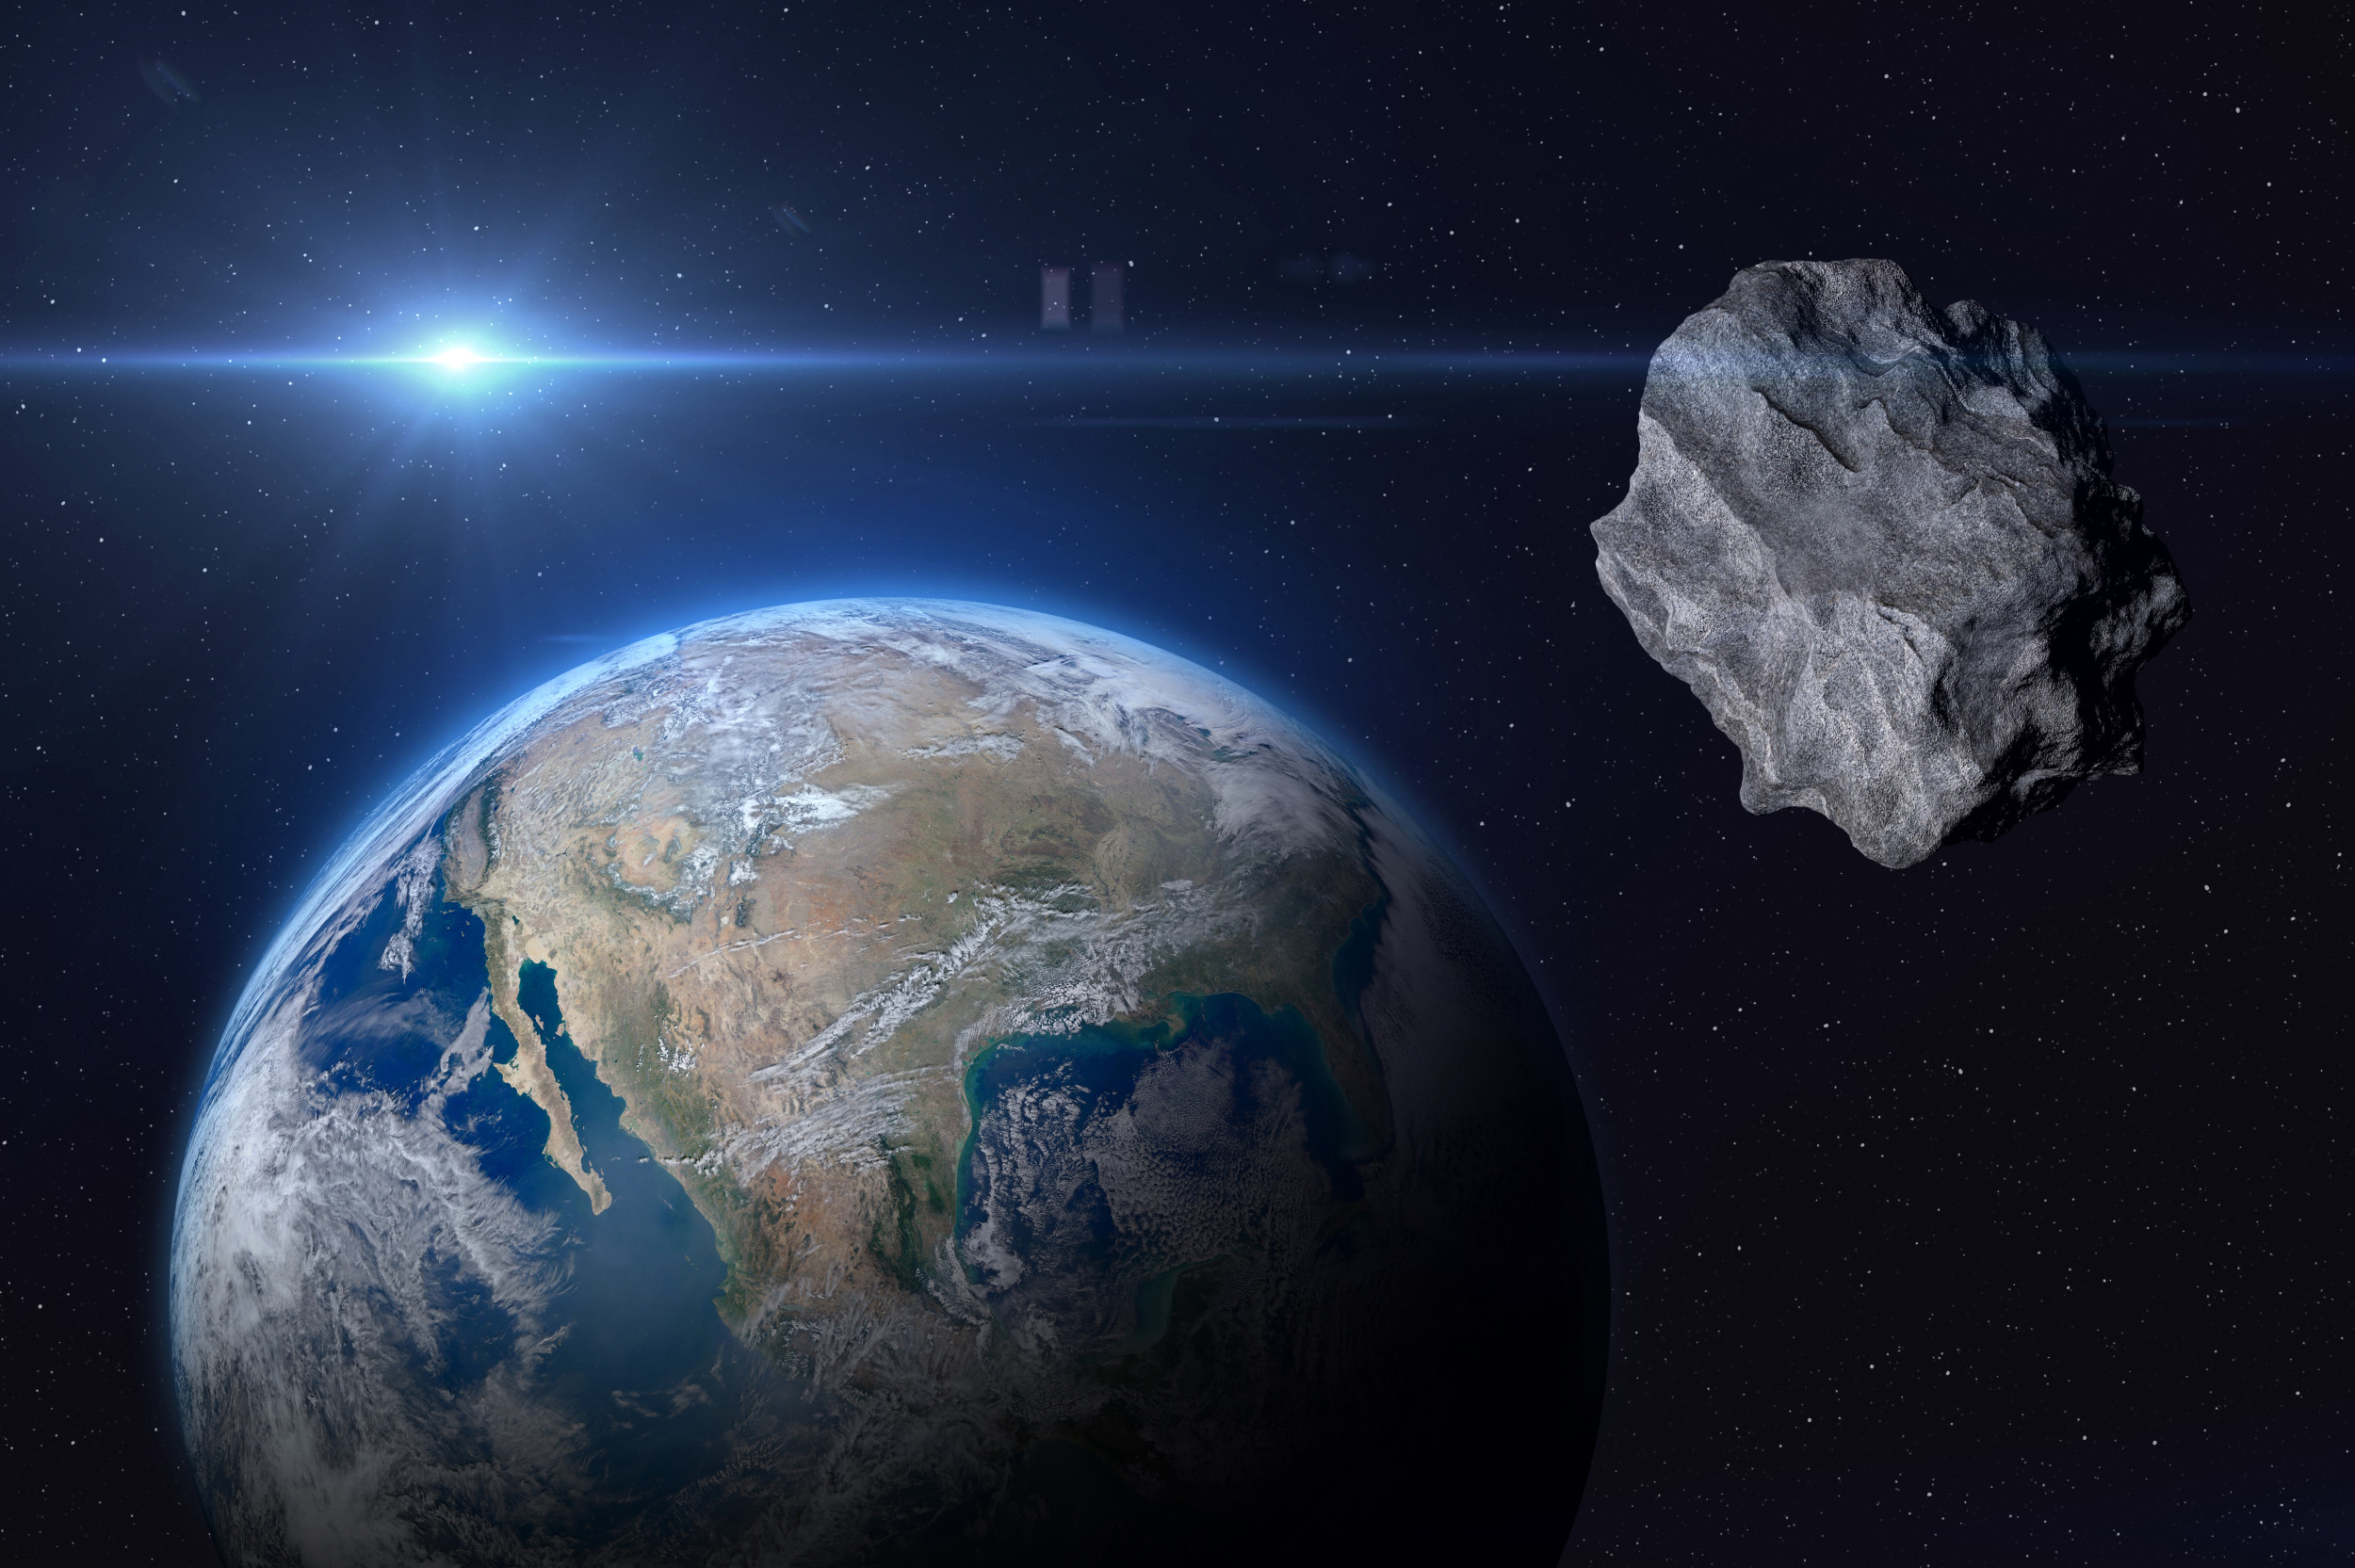 Watch Live as Just Discovered Asteroid Passes Extremely Close to Earth